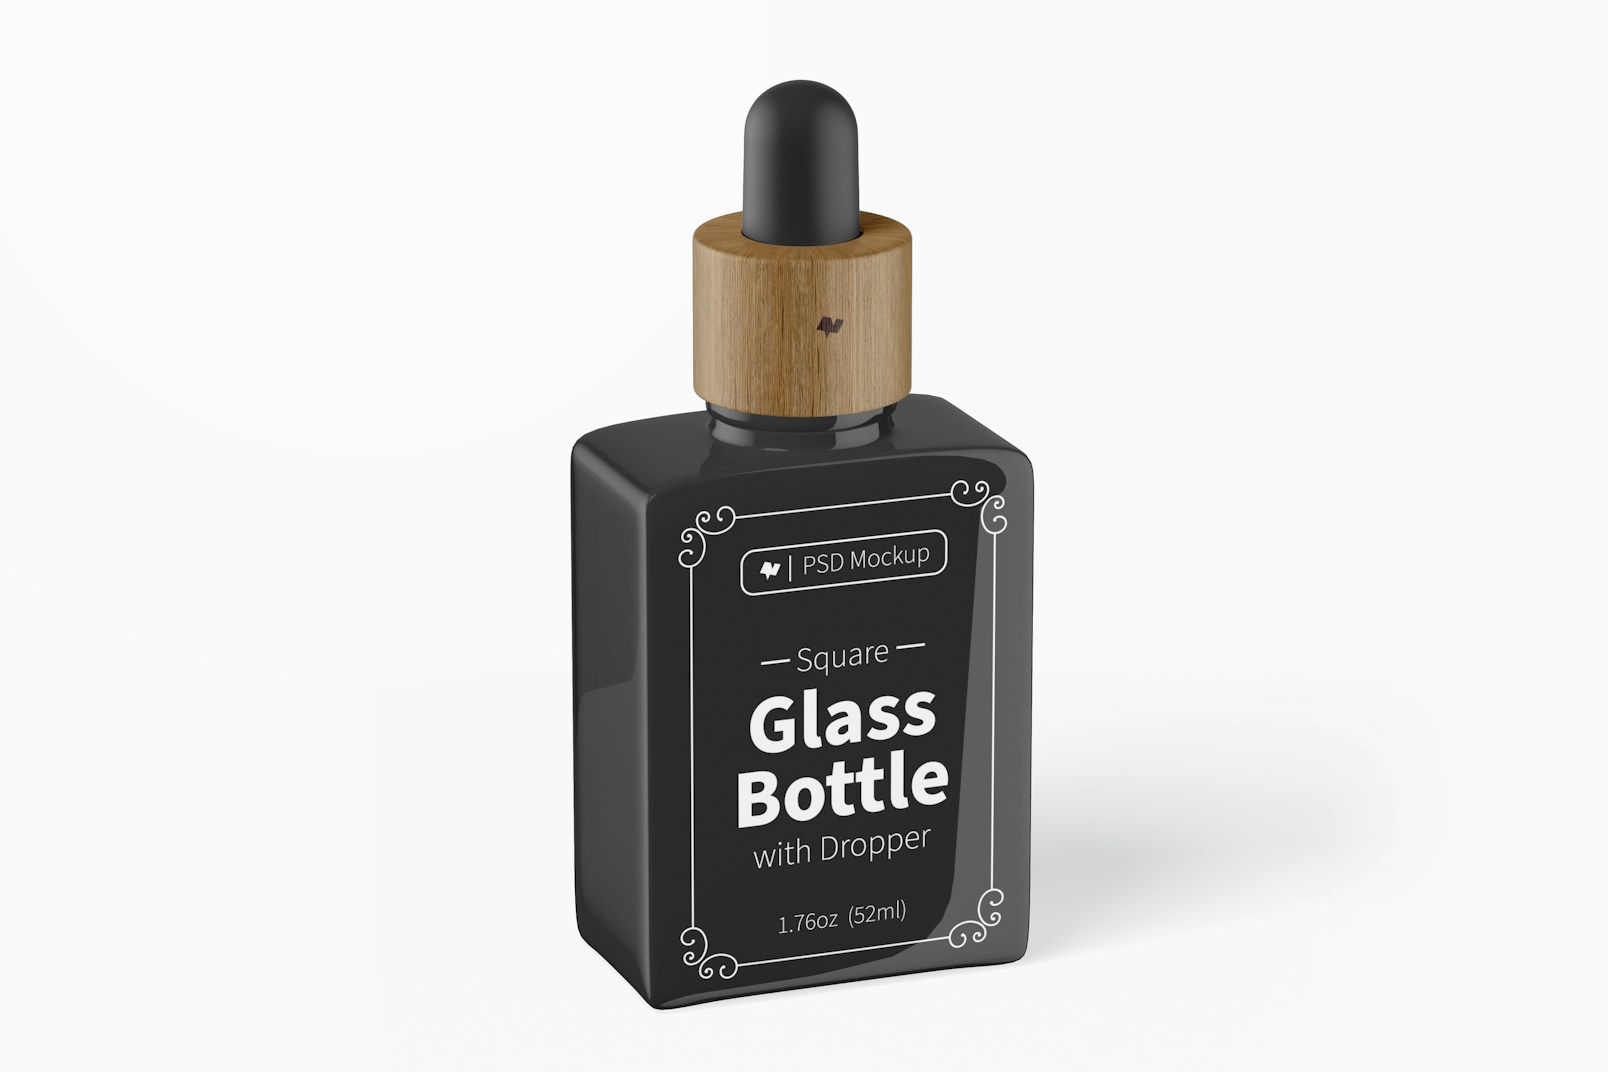 1.76 Oz Square Glass Bottle with Dropper Mockup